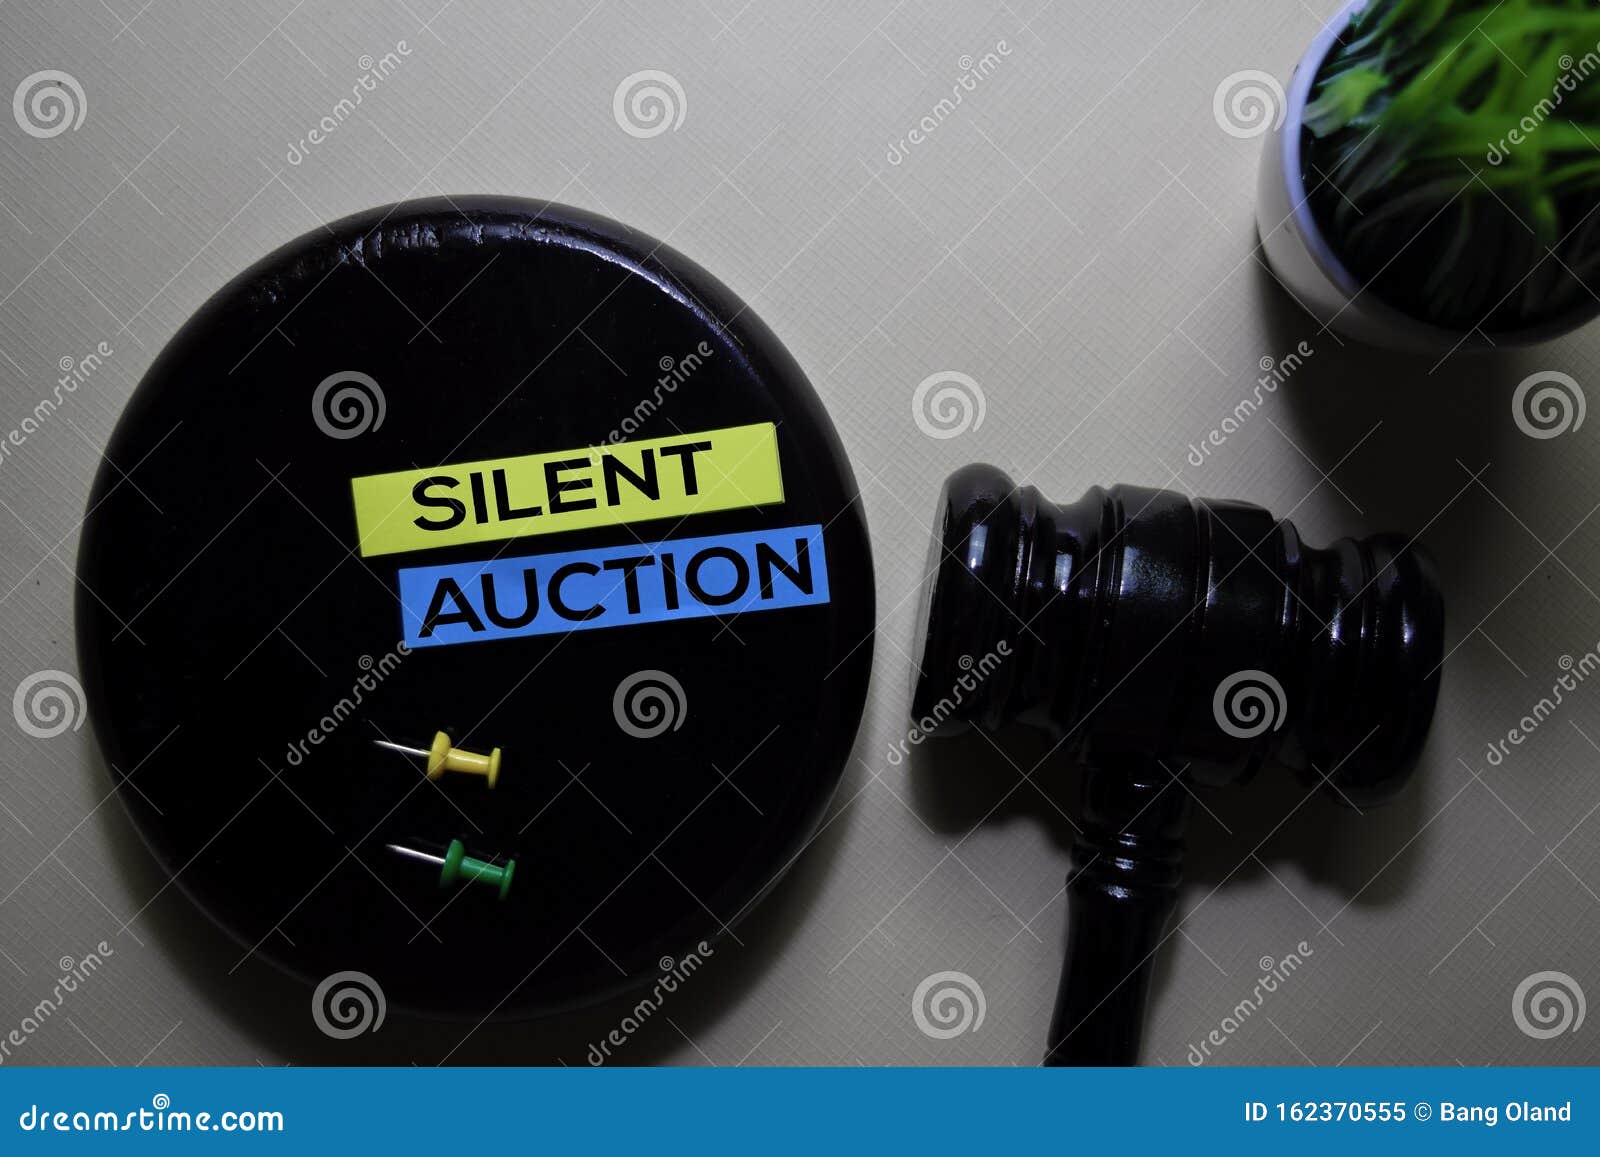 silent auction text on sticky notes and gavel  on office desk. justice law concept